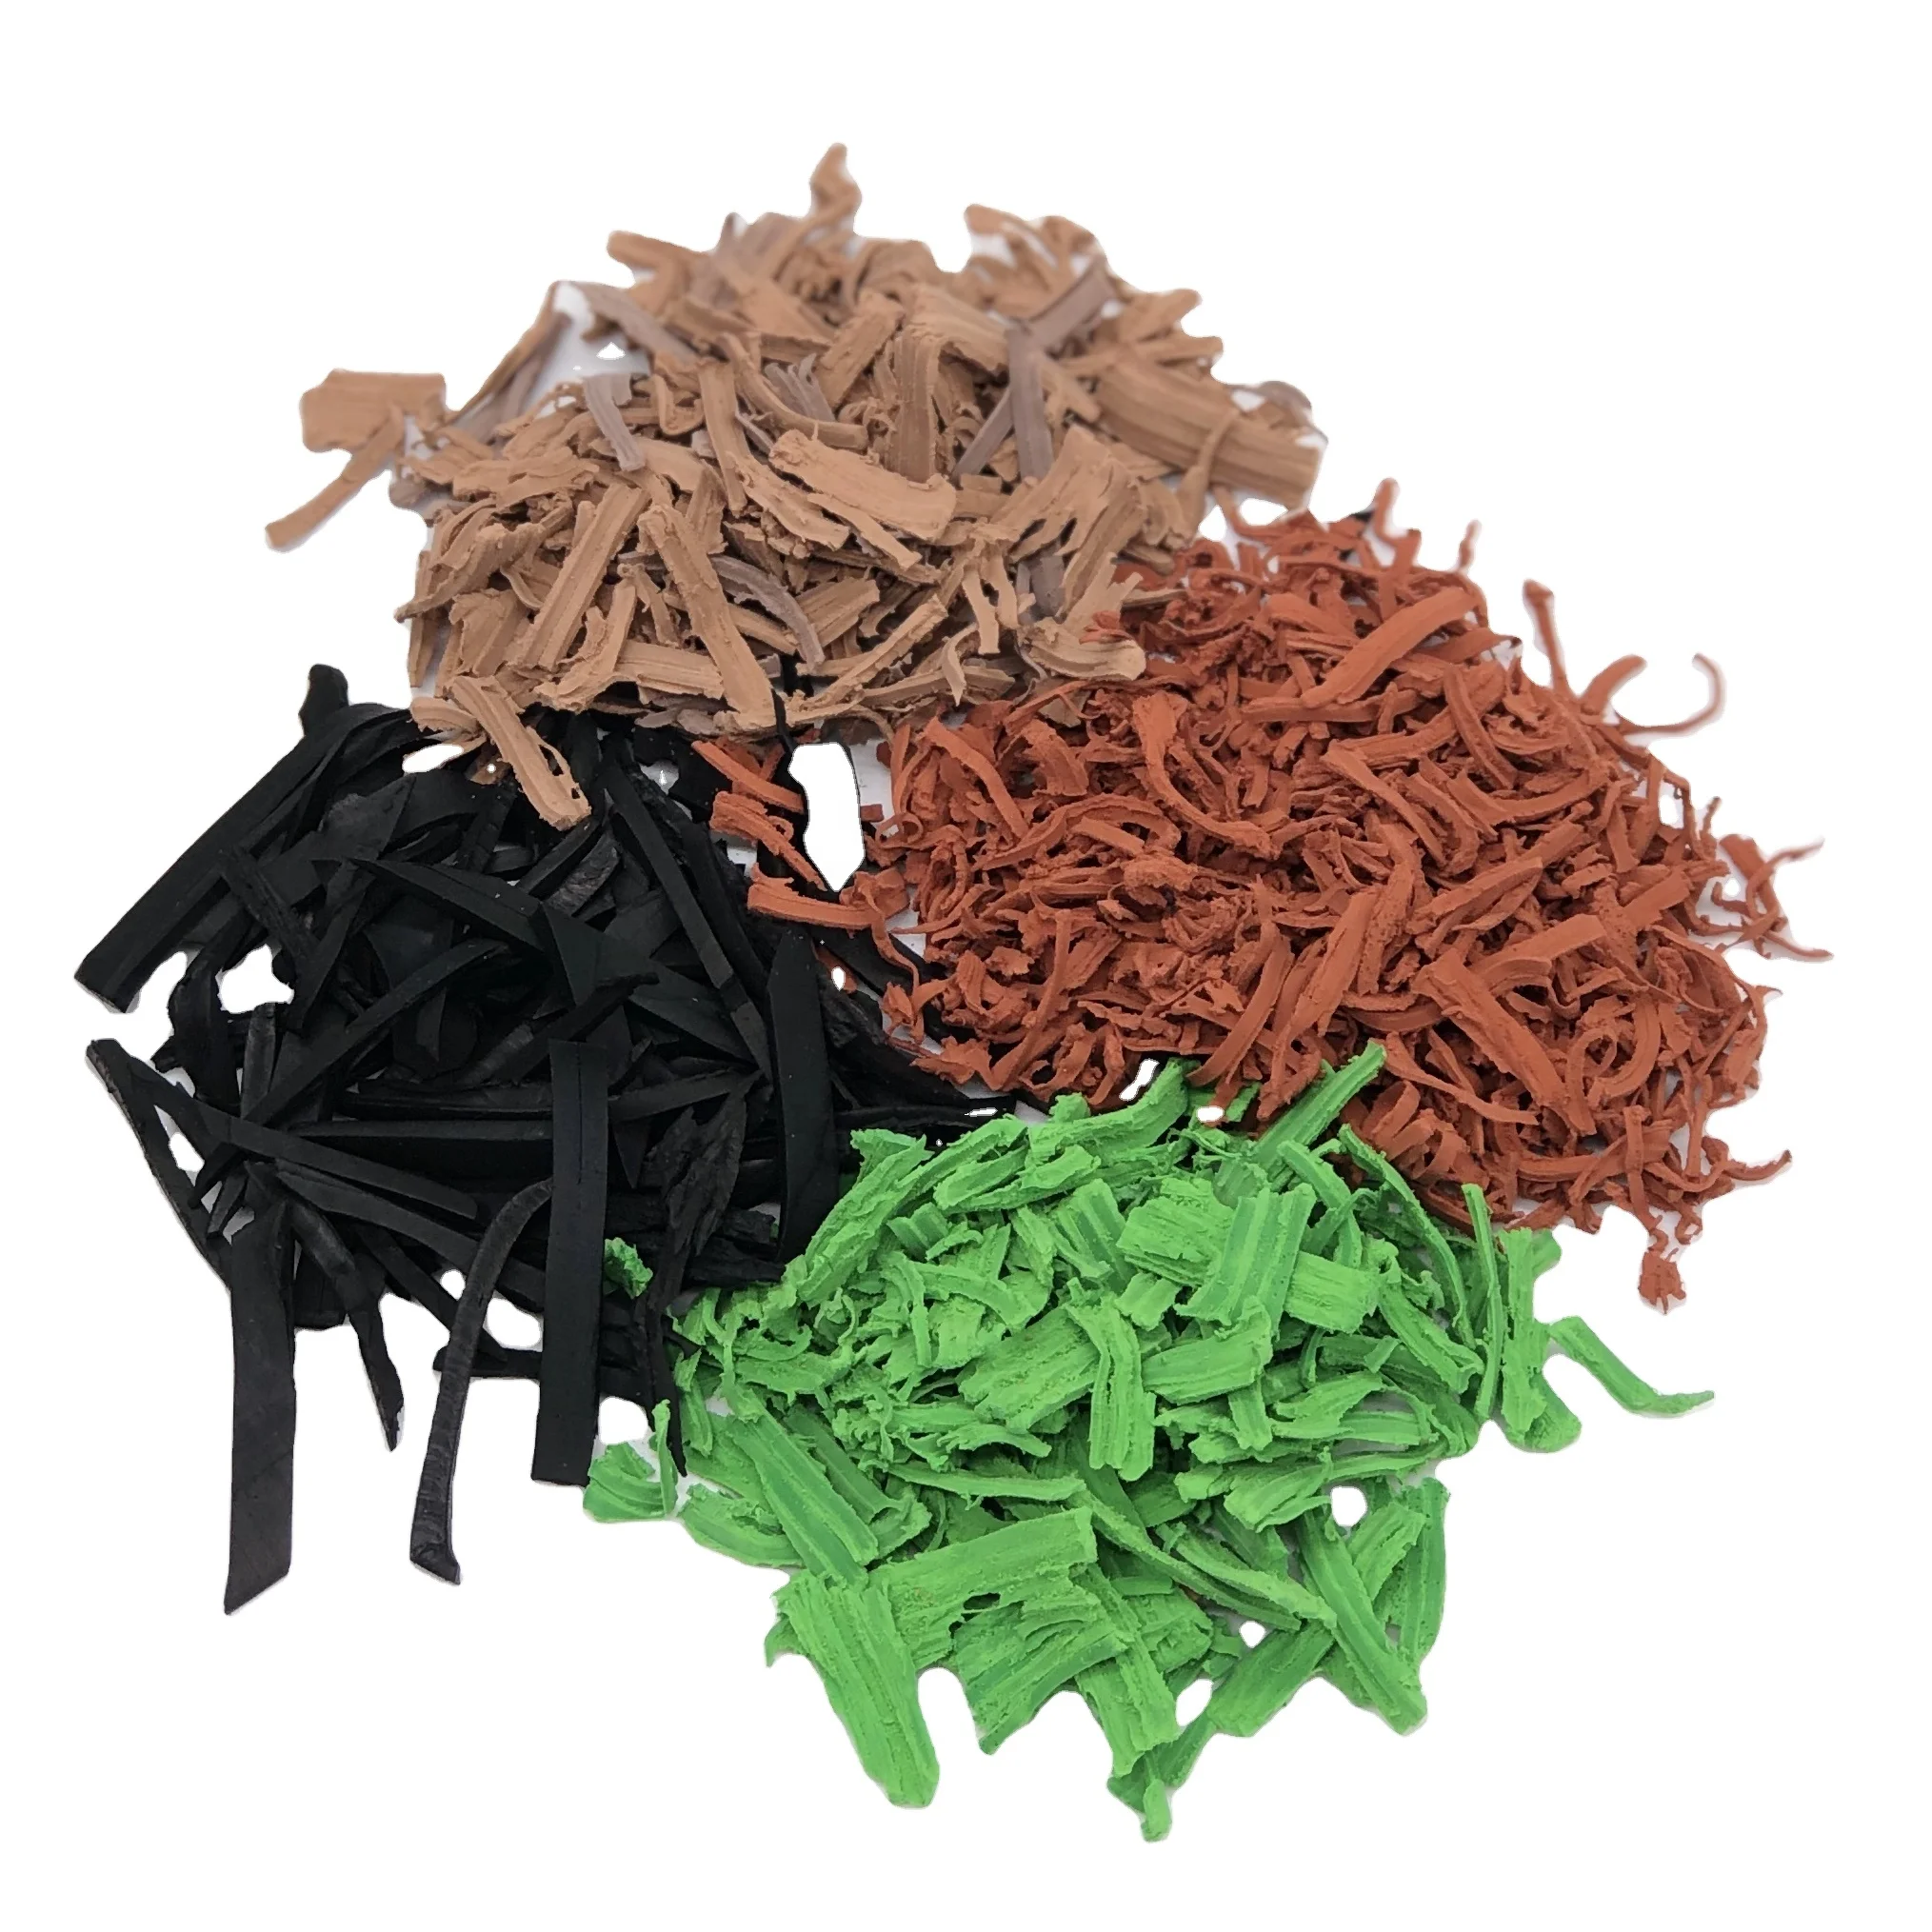 High Quality Recycled Playground Runber Mulch EPDM Rubber Mulch For Tree Rings Wholesale